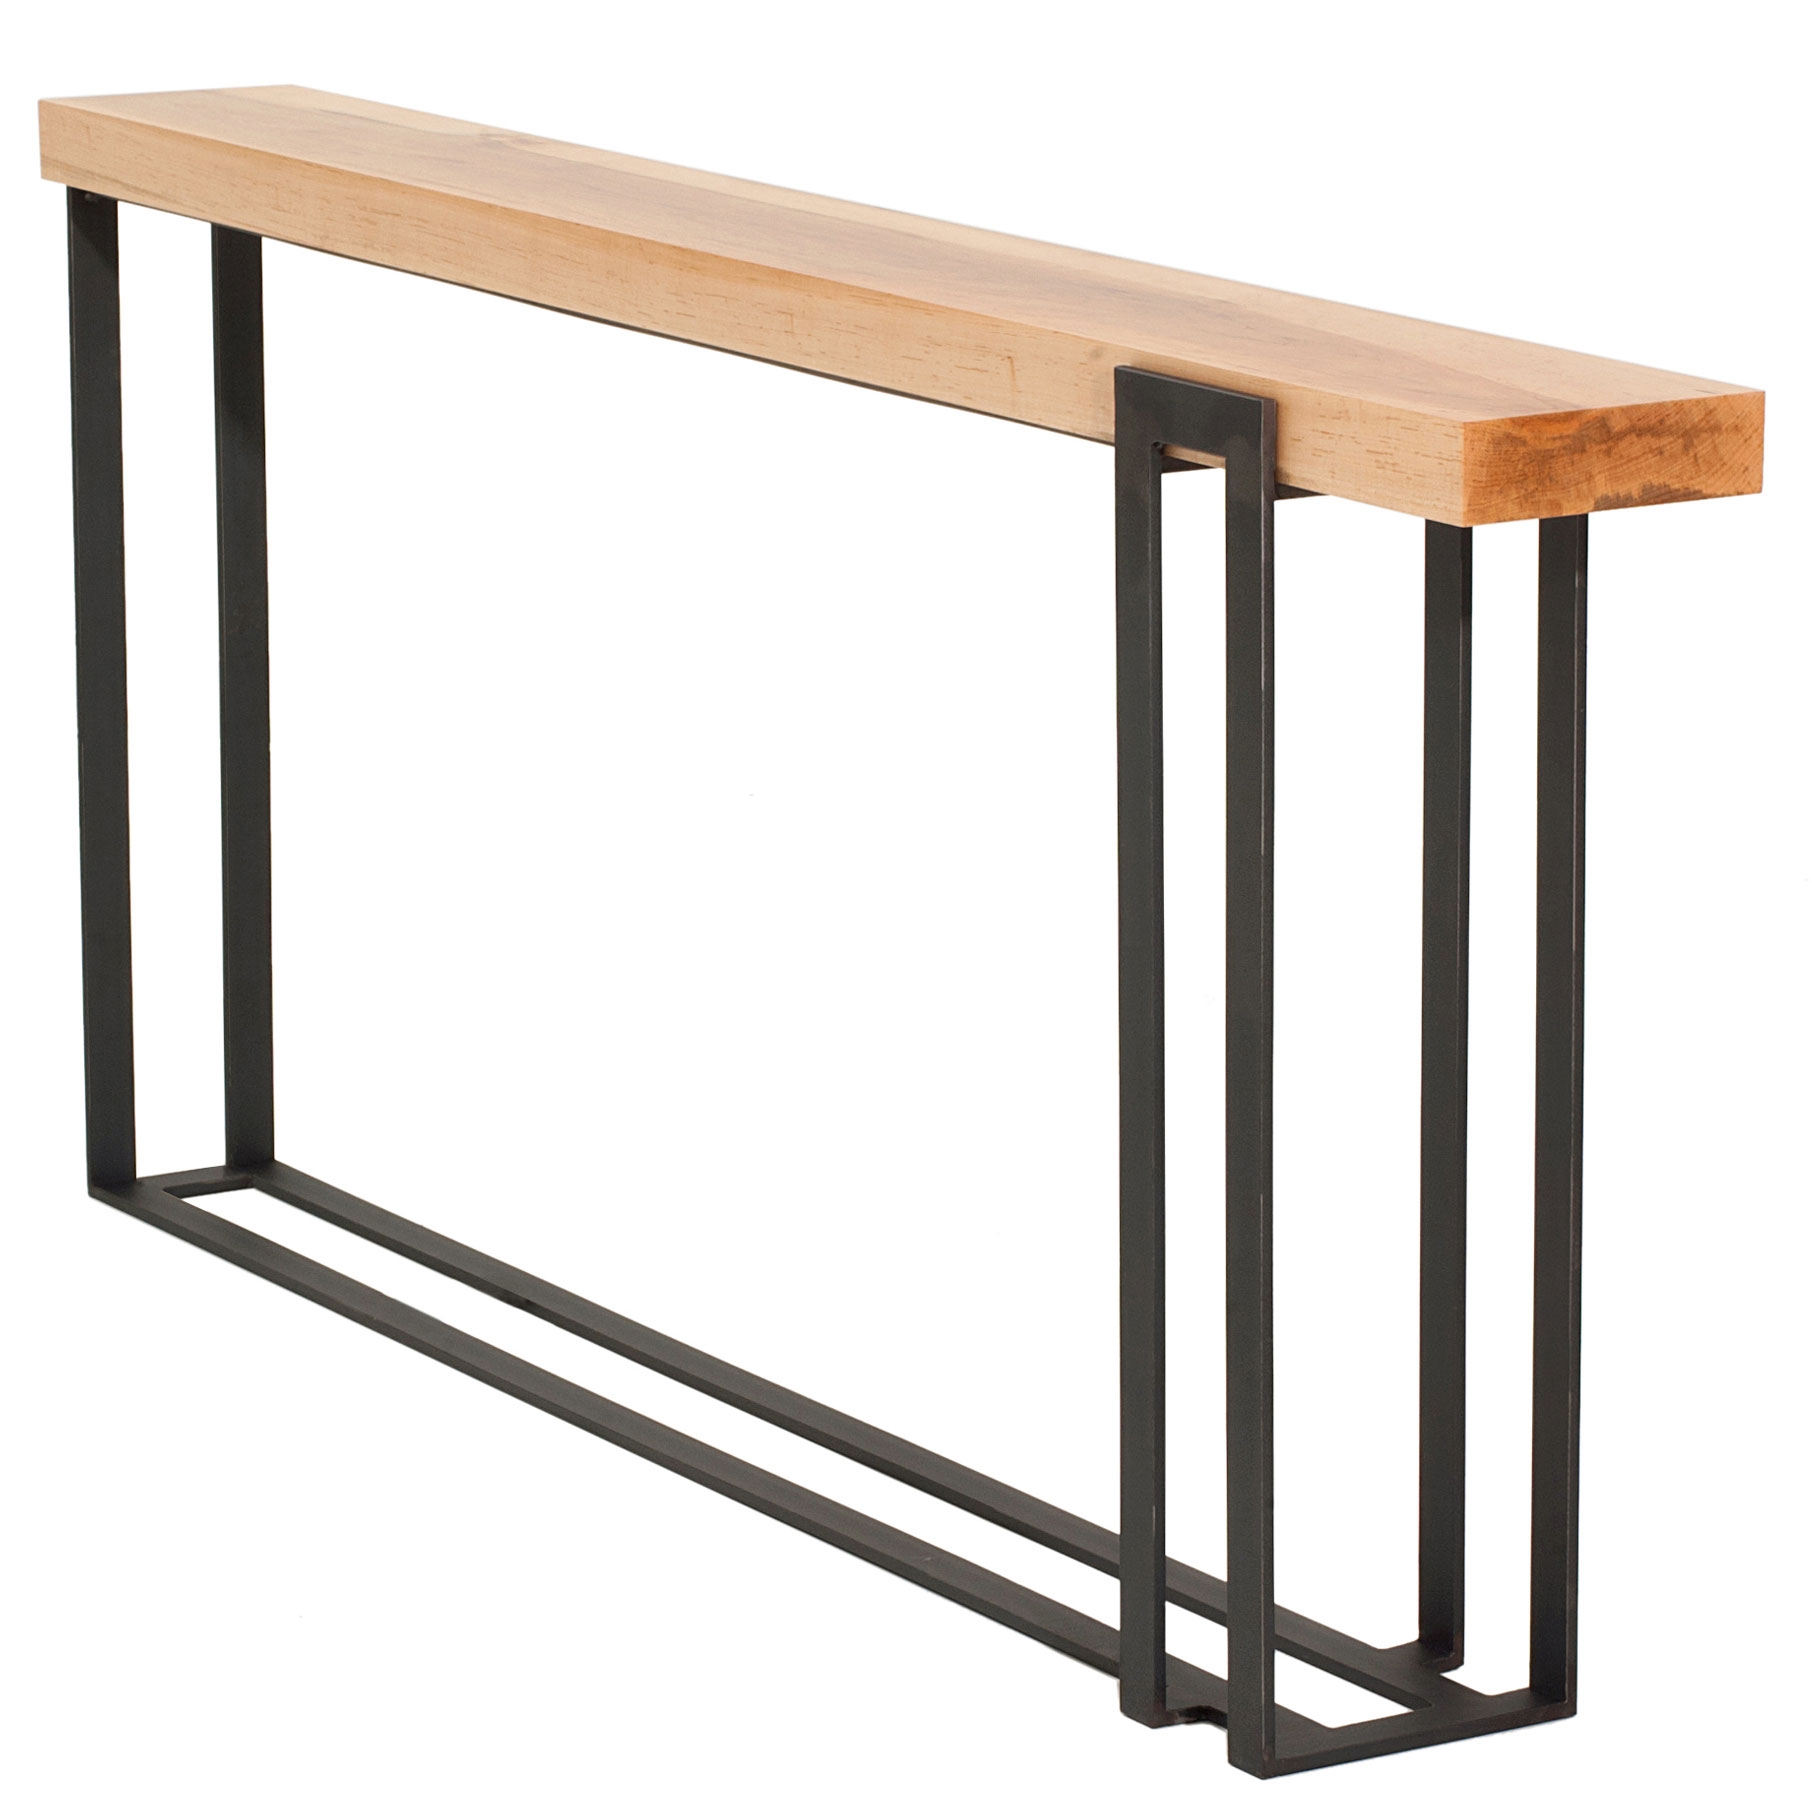 furniture outstanding britanish skinny console table for livingroom solid wood and metal with baskets drawers storage slender inch deep foyer small thin accent pool dining lane